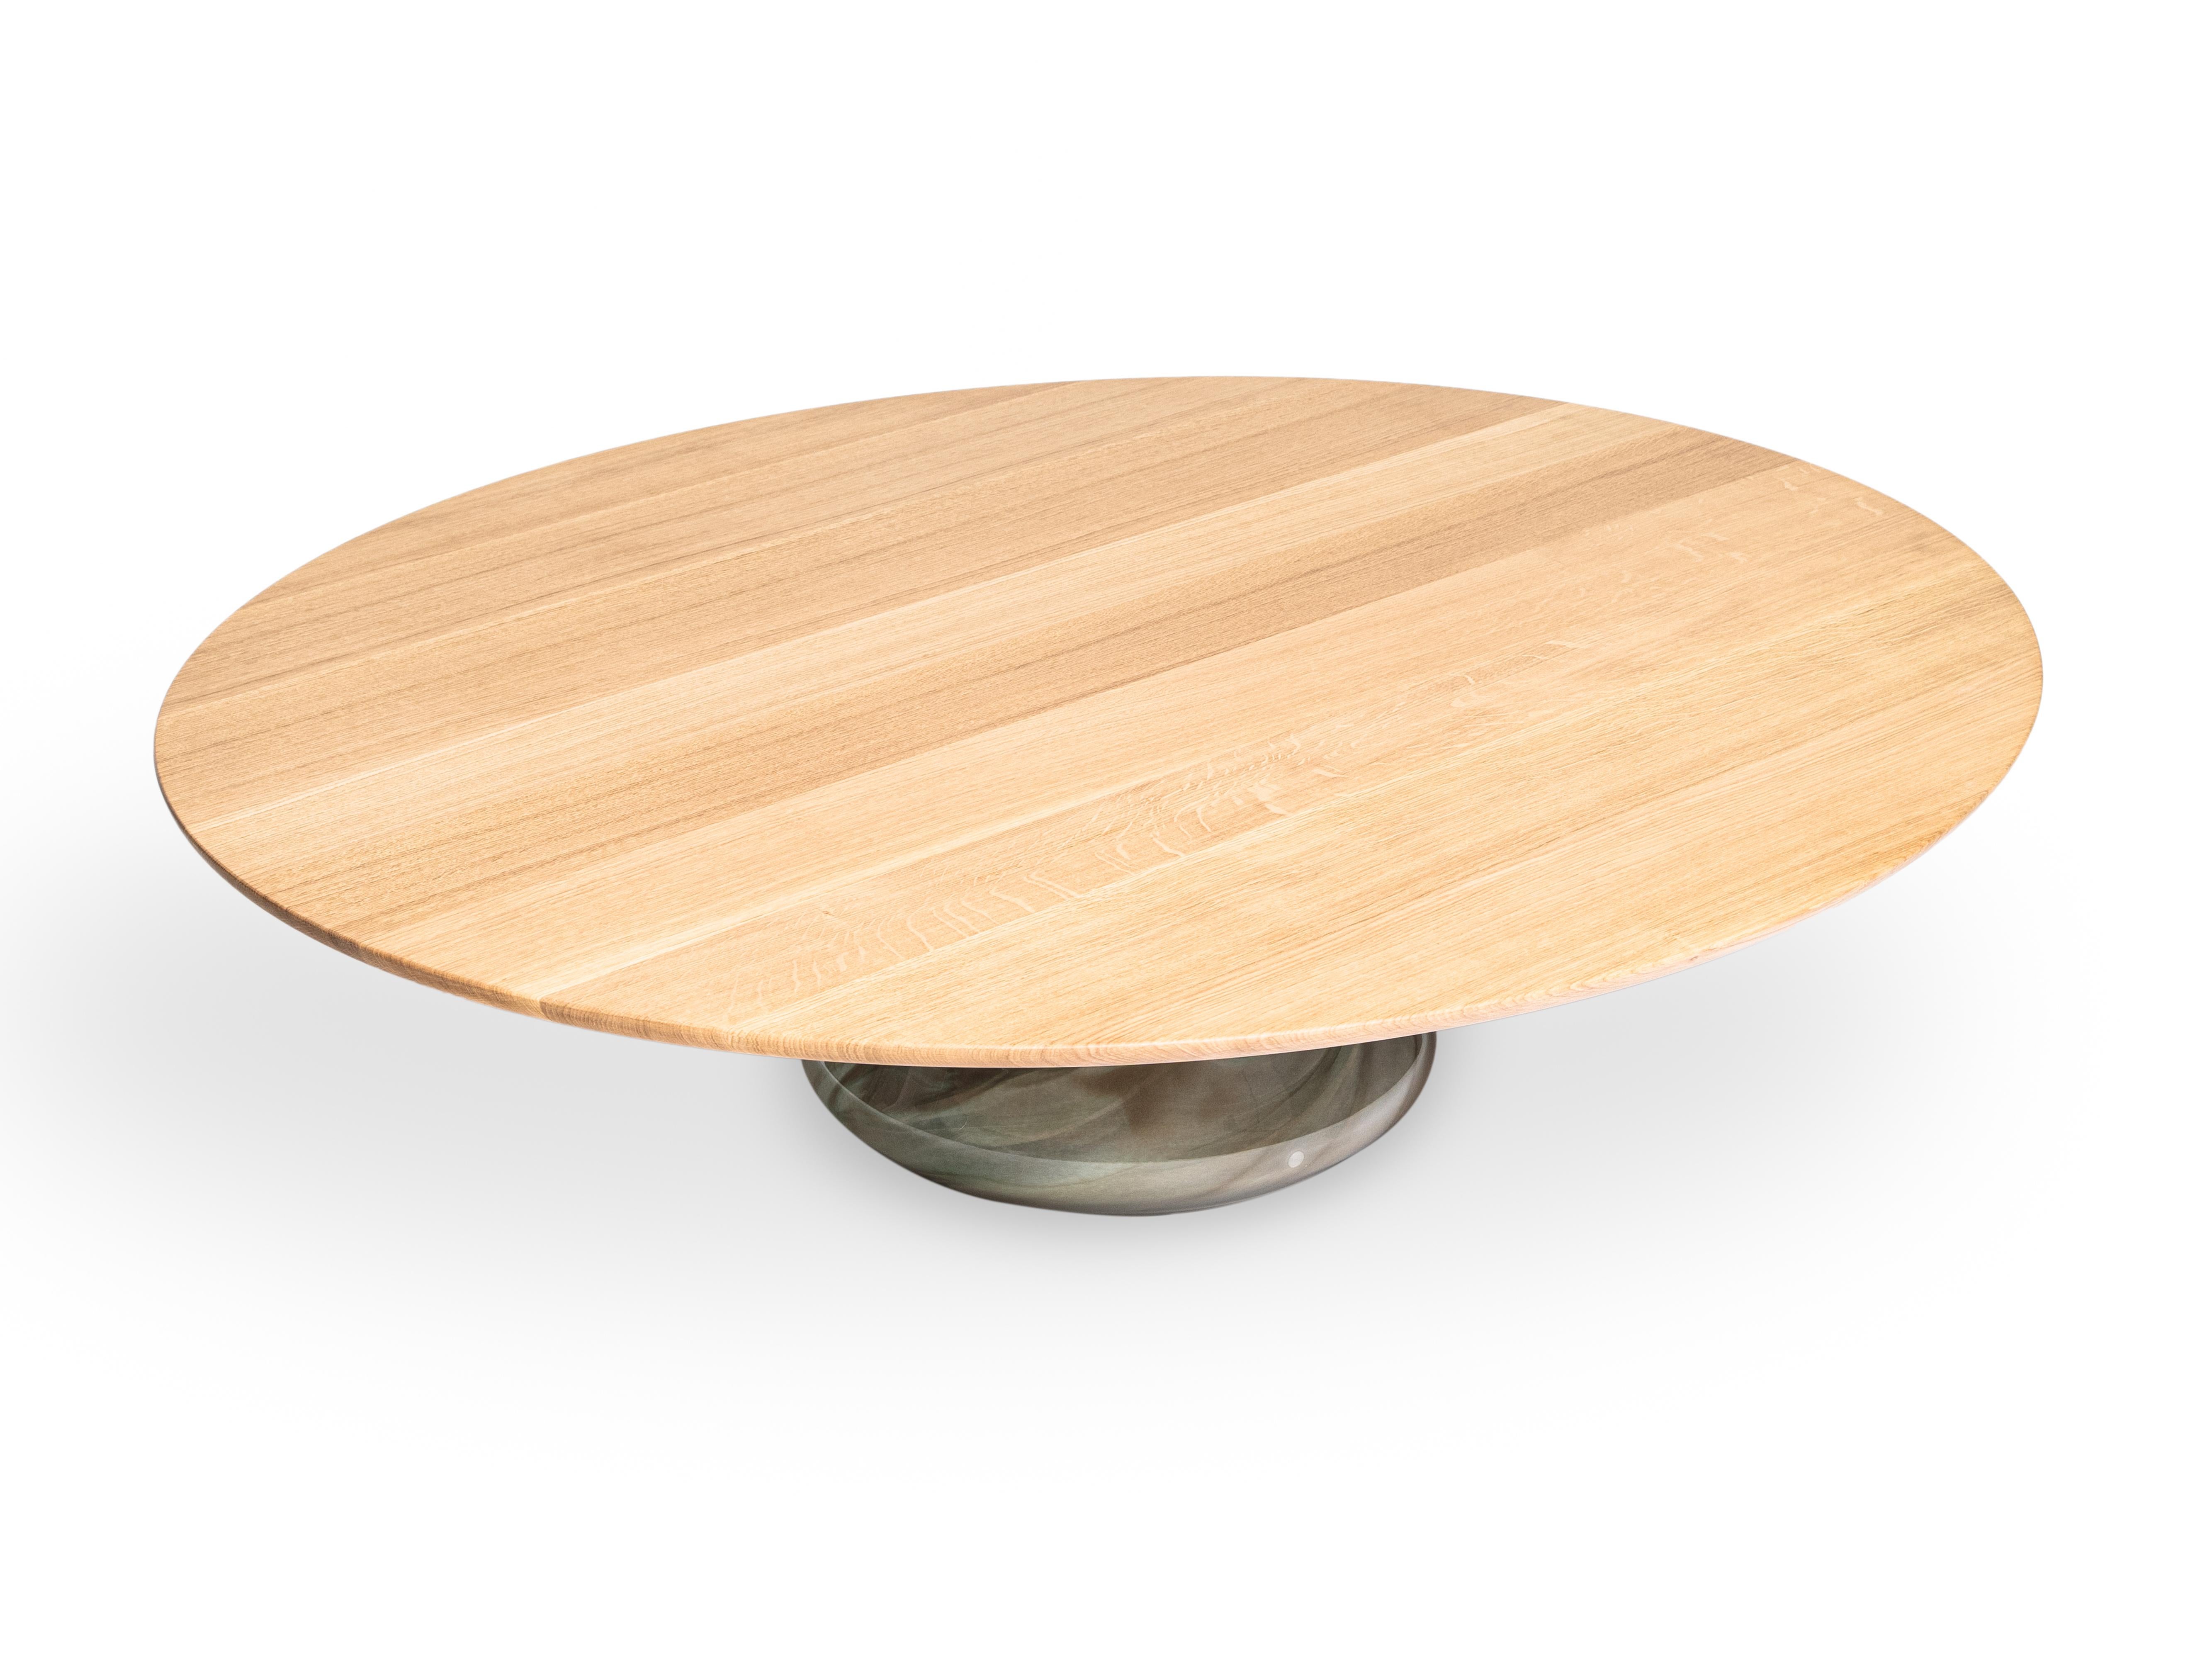 Contemporary The Earthy Eclipse I Coffee Table, 1 of 1 by Grzegorz Majka